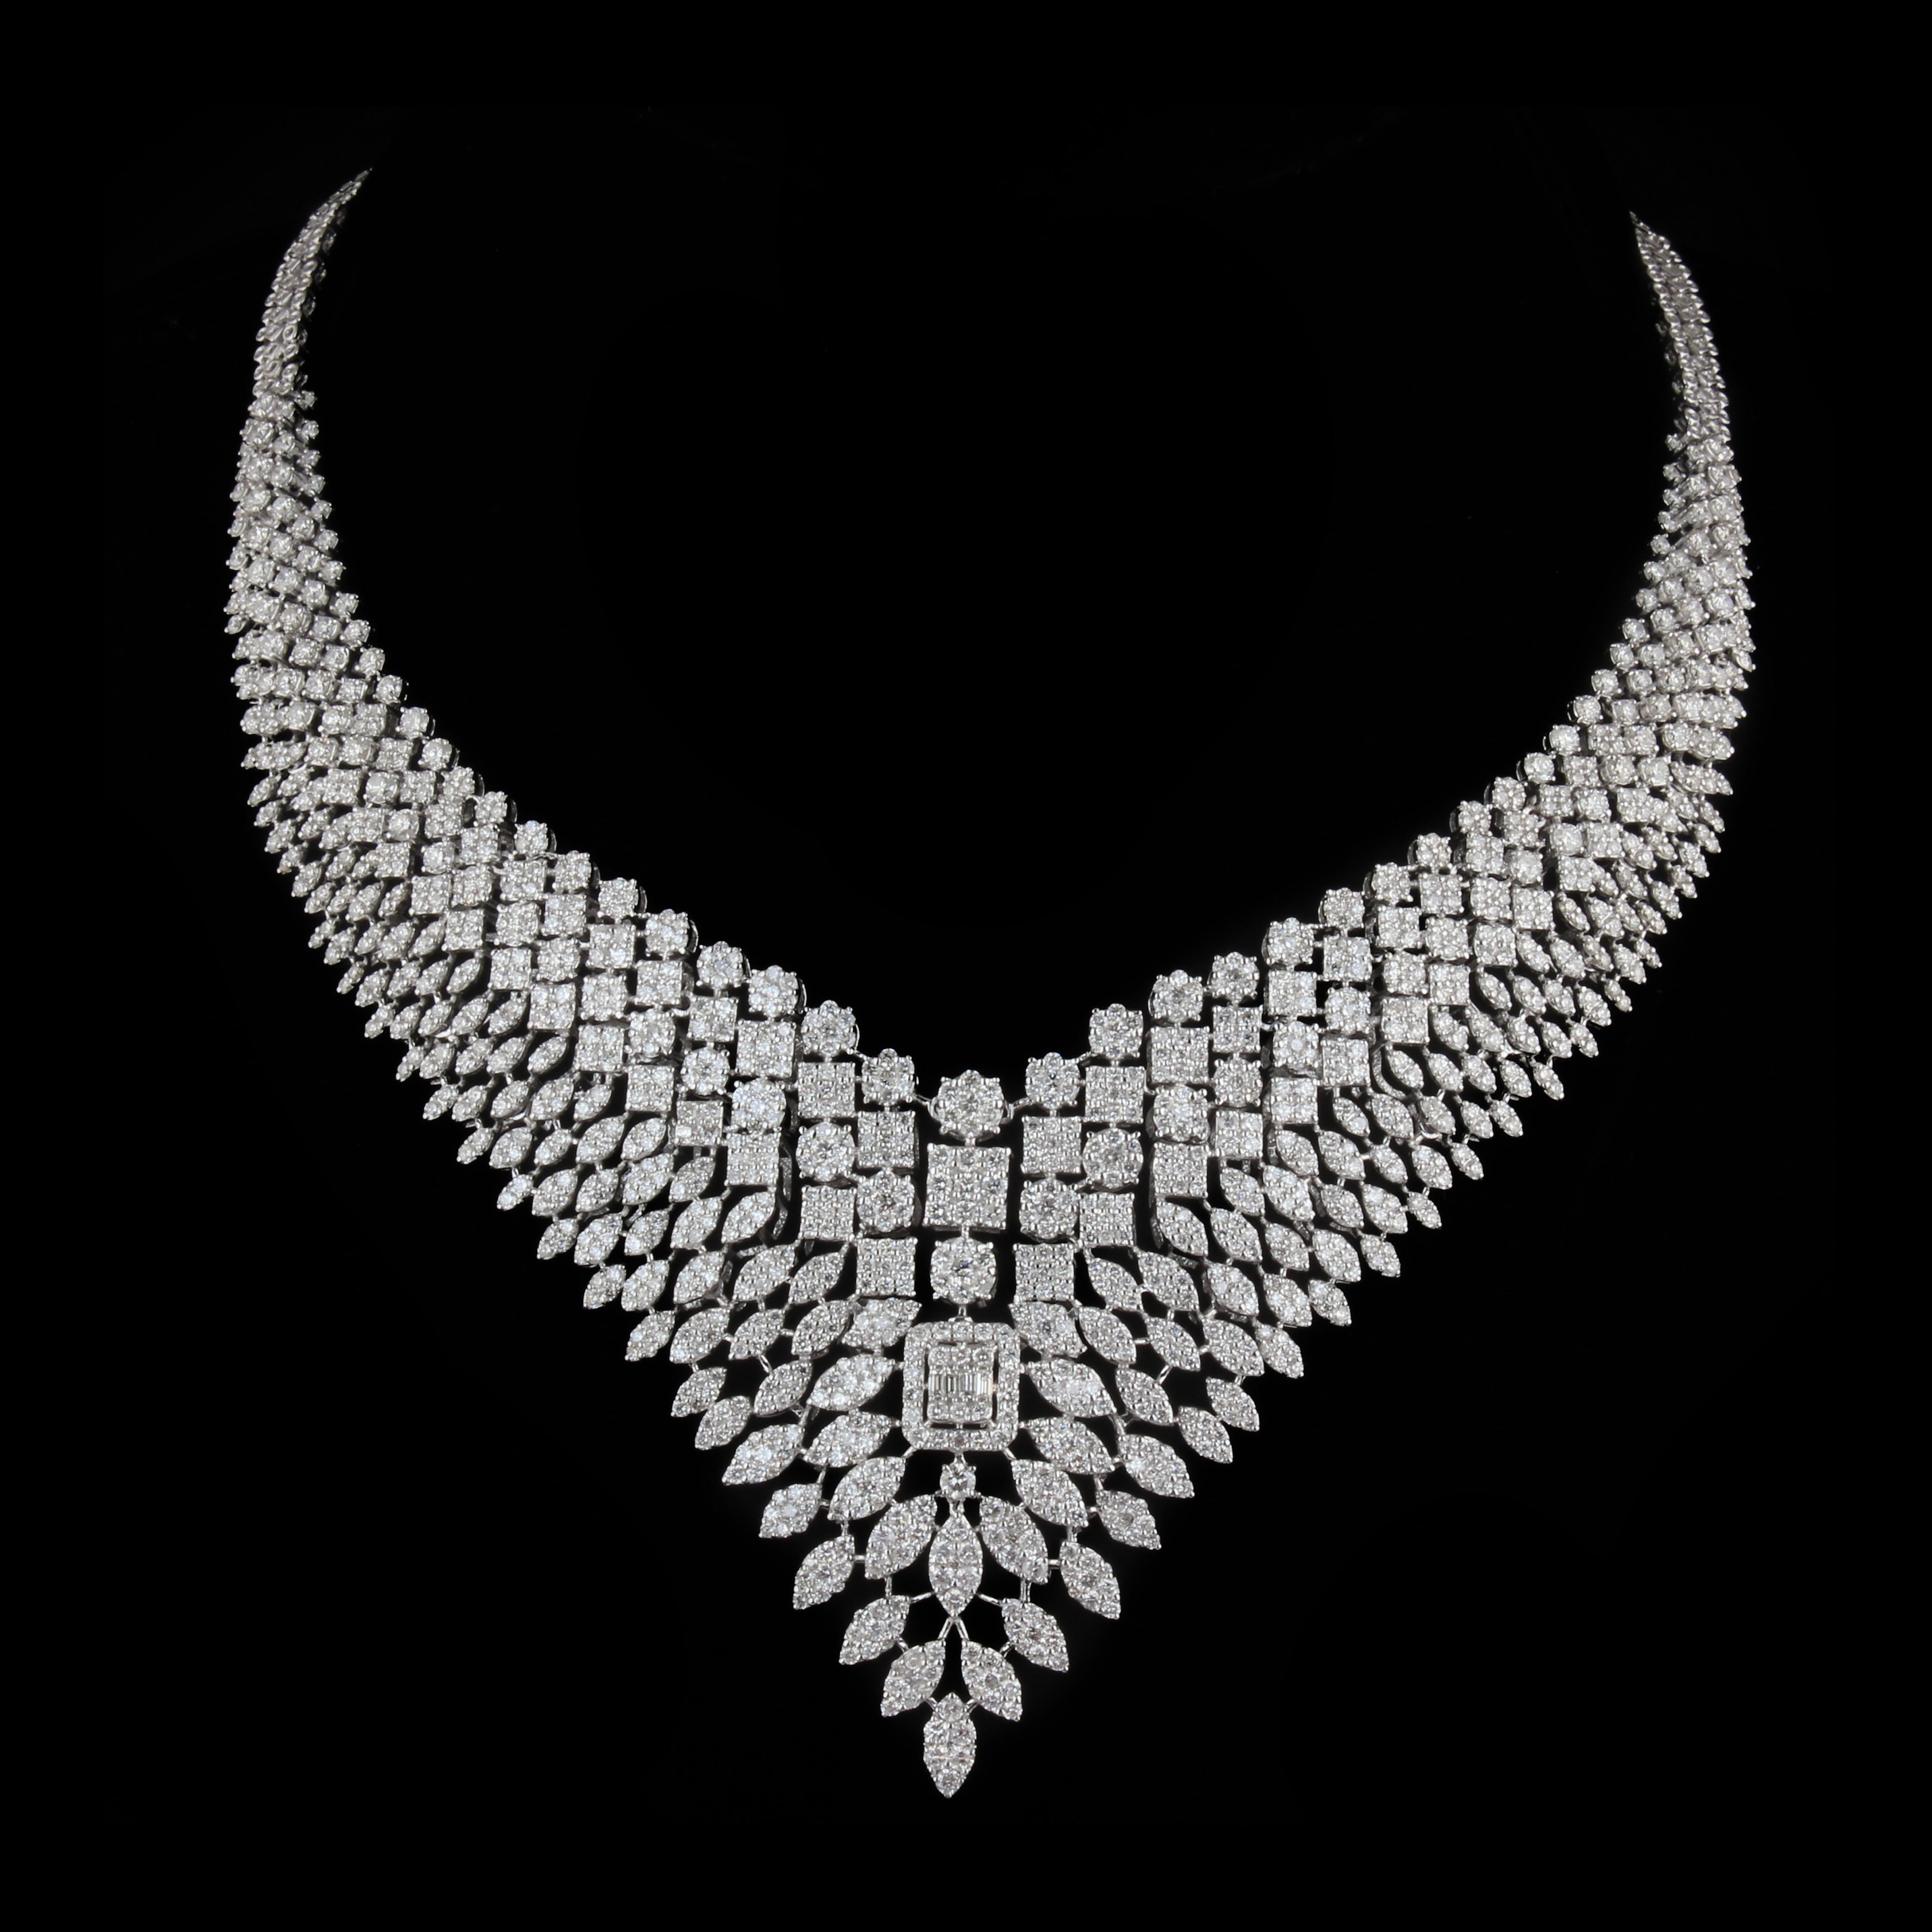 Item Code :- CN-2721
Gross Wt. :- 82.25 gm
18k White Gold Wt. :- 77.61 gm
Natural Diamond Wt. :- 23.20 Ct. ( AVERAGE DIAMOND CLARITY SI1-SI2 & COLOR H-I )
Necklace Size :- 16 inches Long

✦ Sizing
.....................
We can adjust most items to